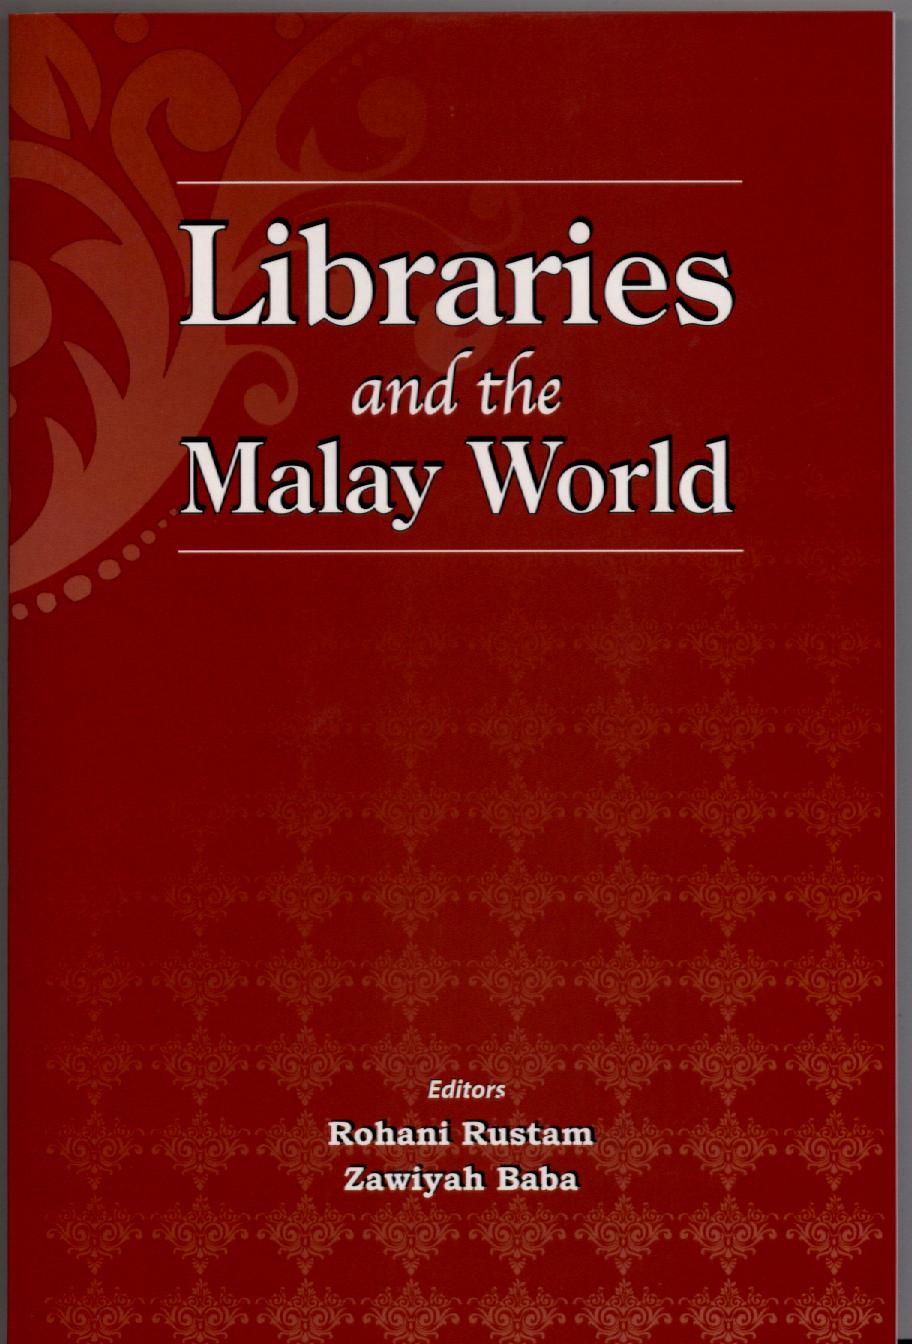 Libraries and the Malay World